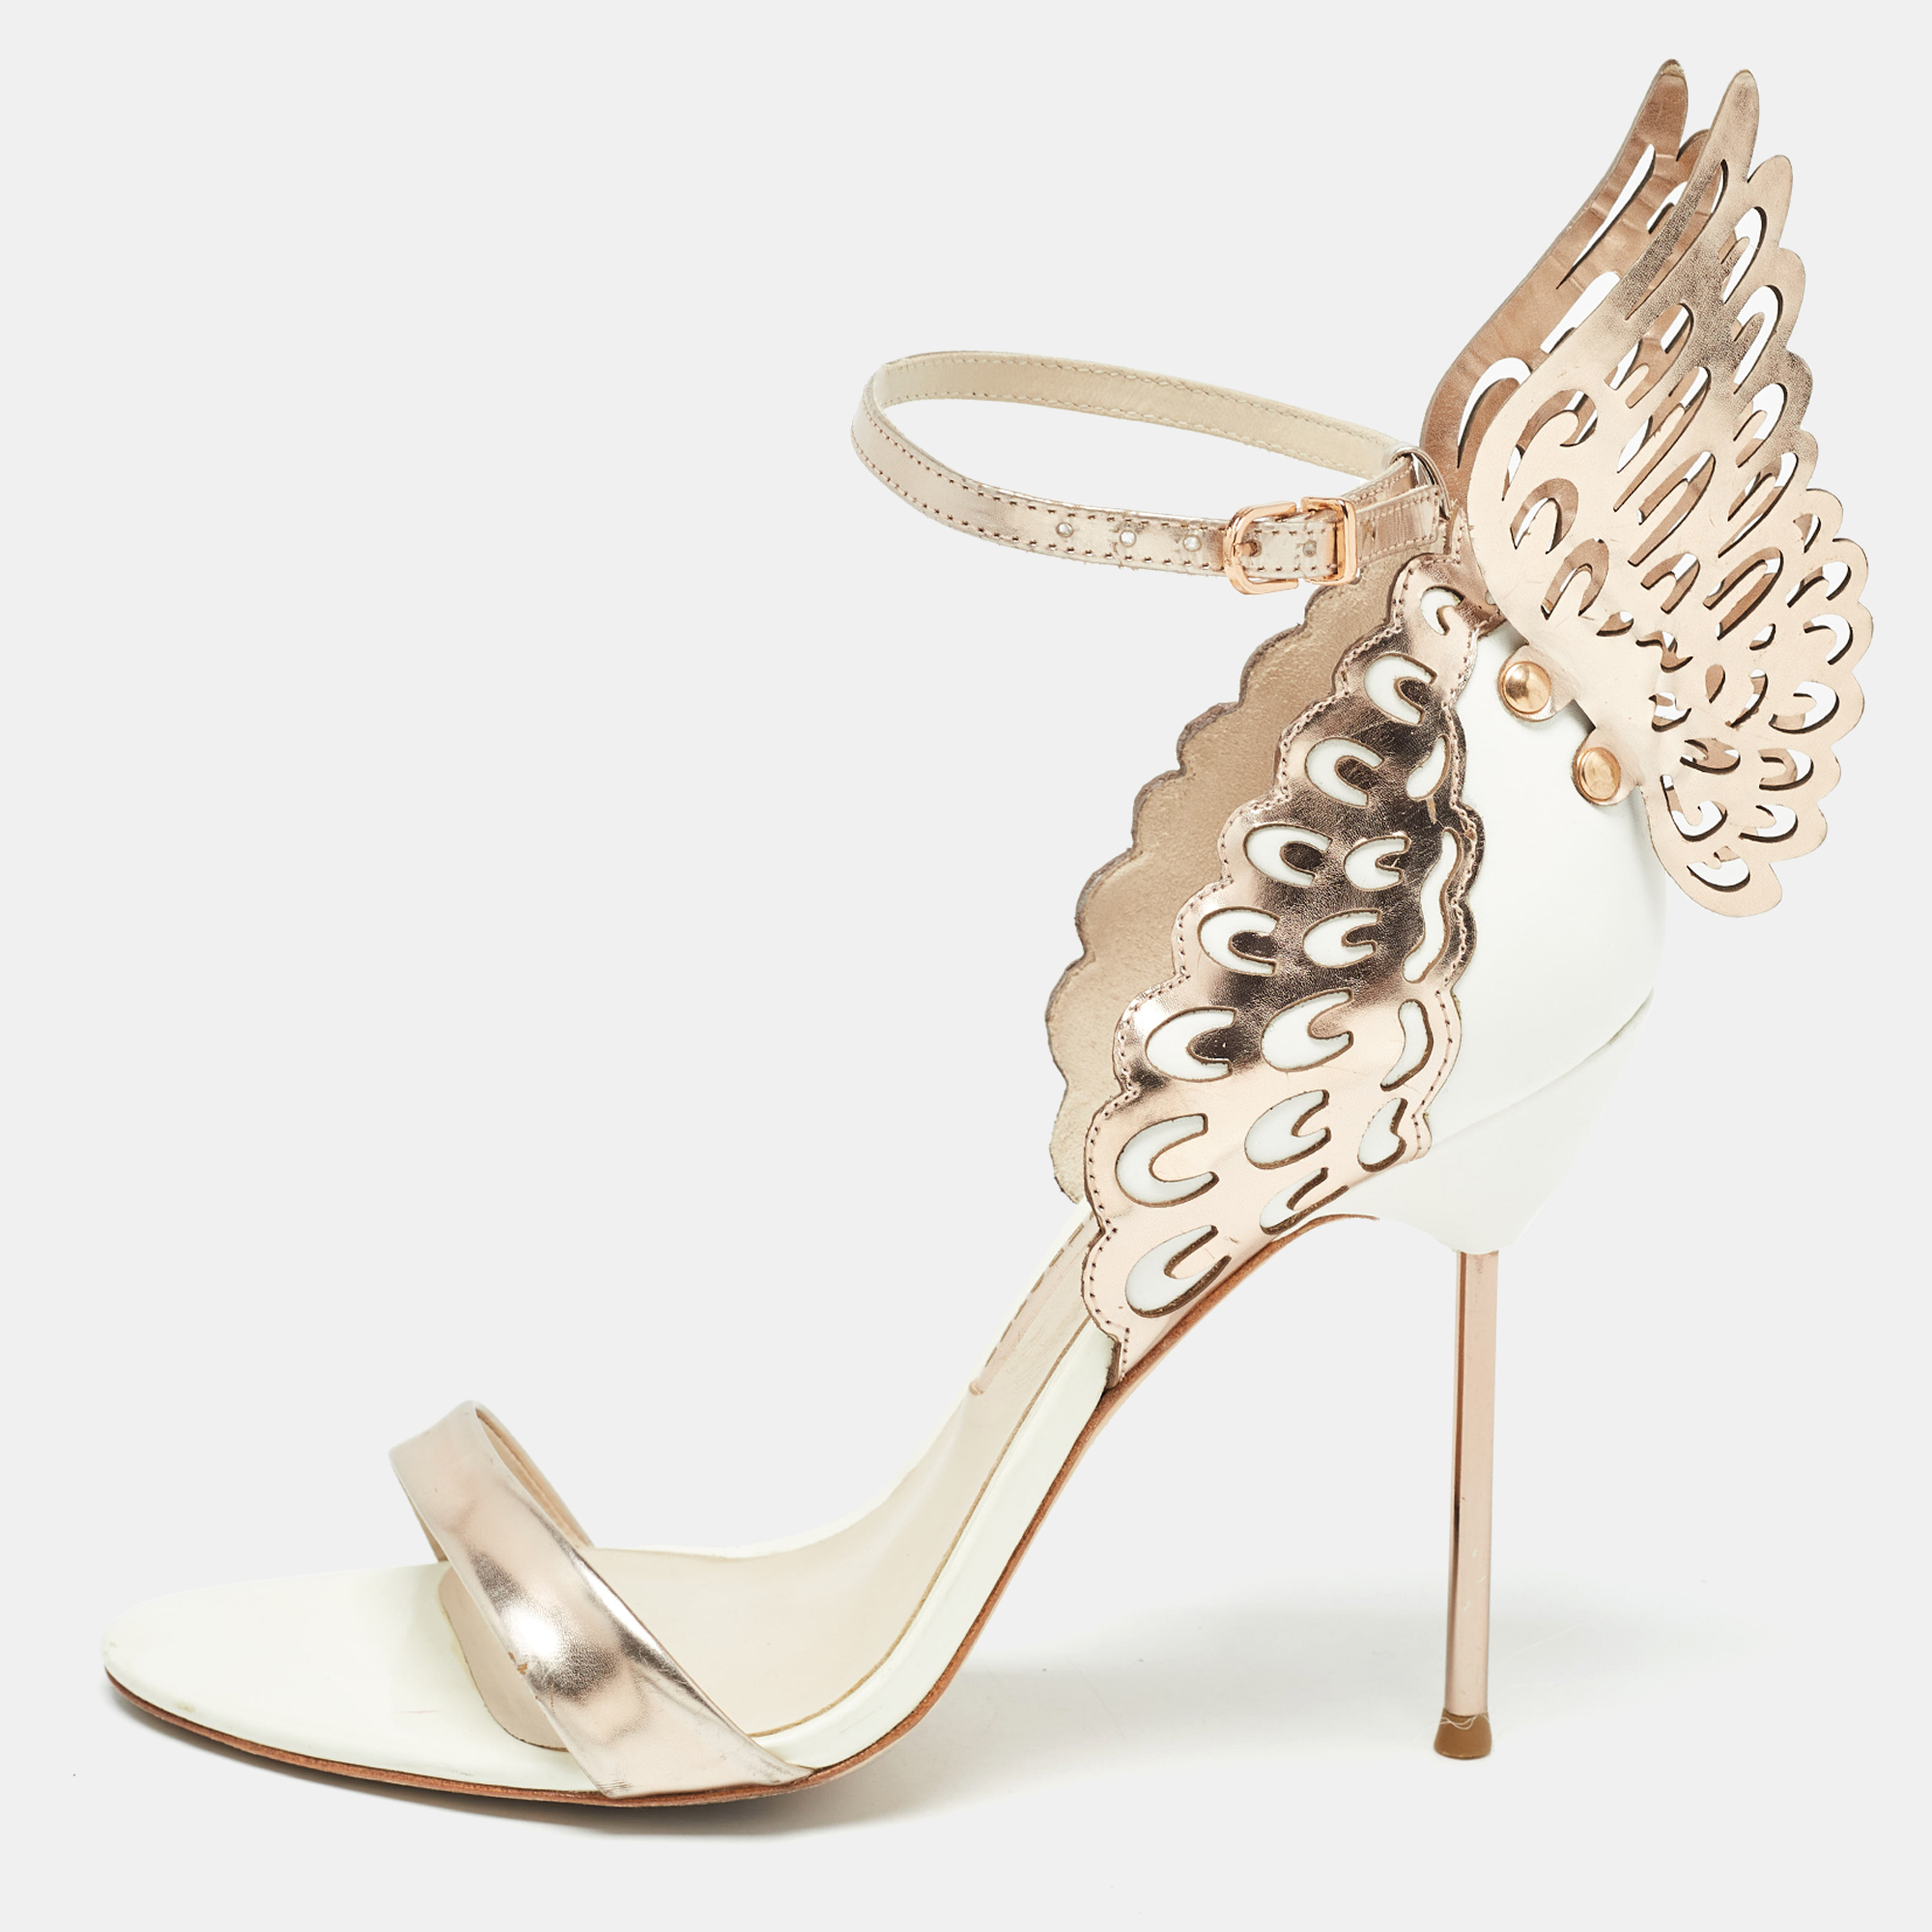 Sophia webster white/rose gold patent and leather evangeline sandals size 39